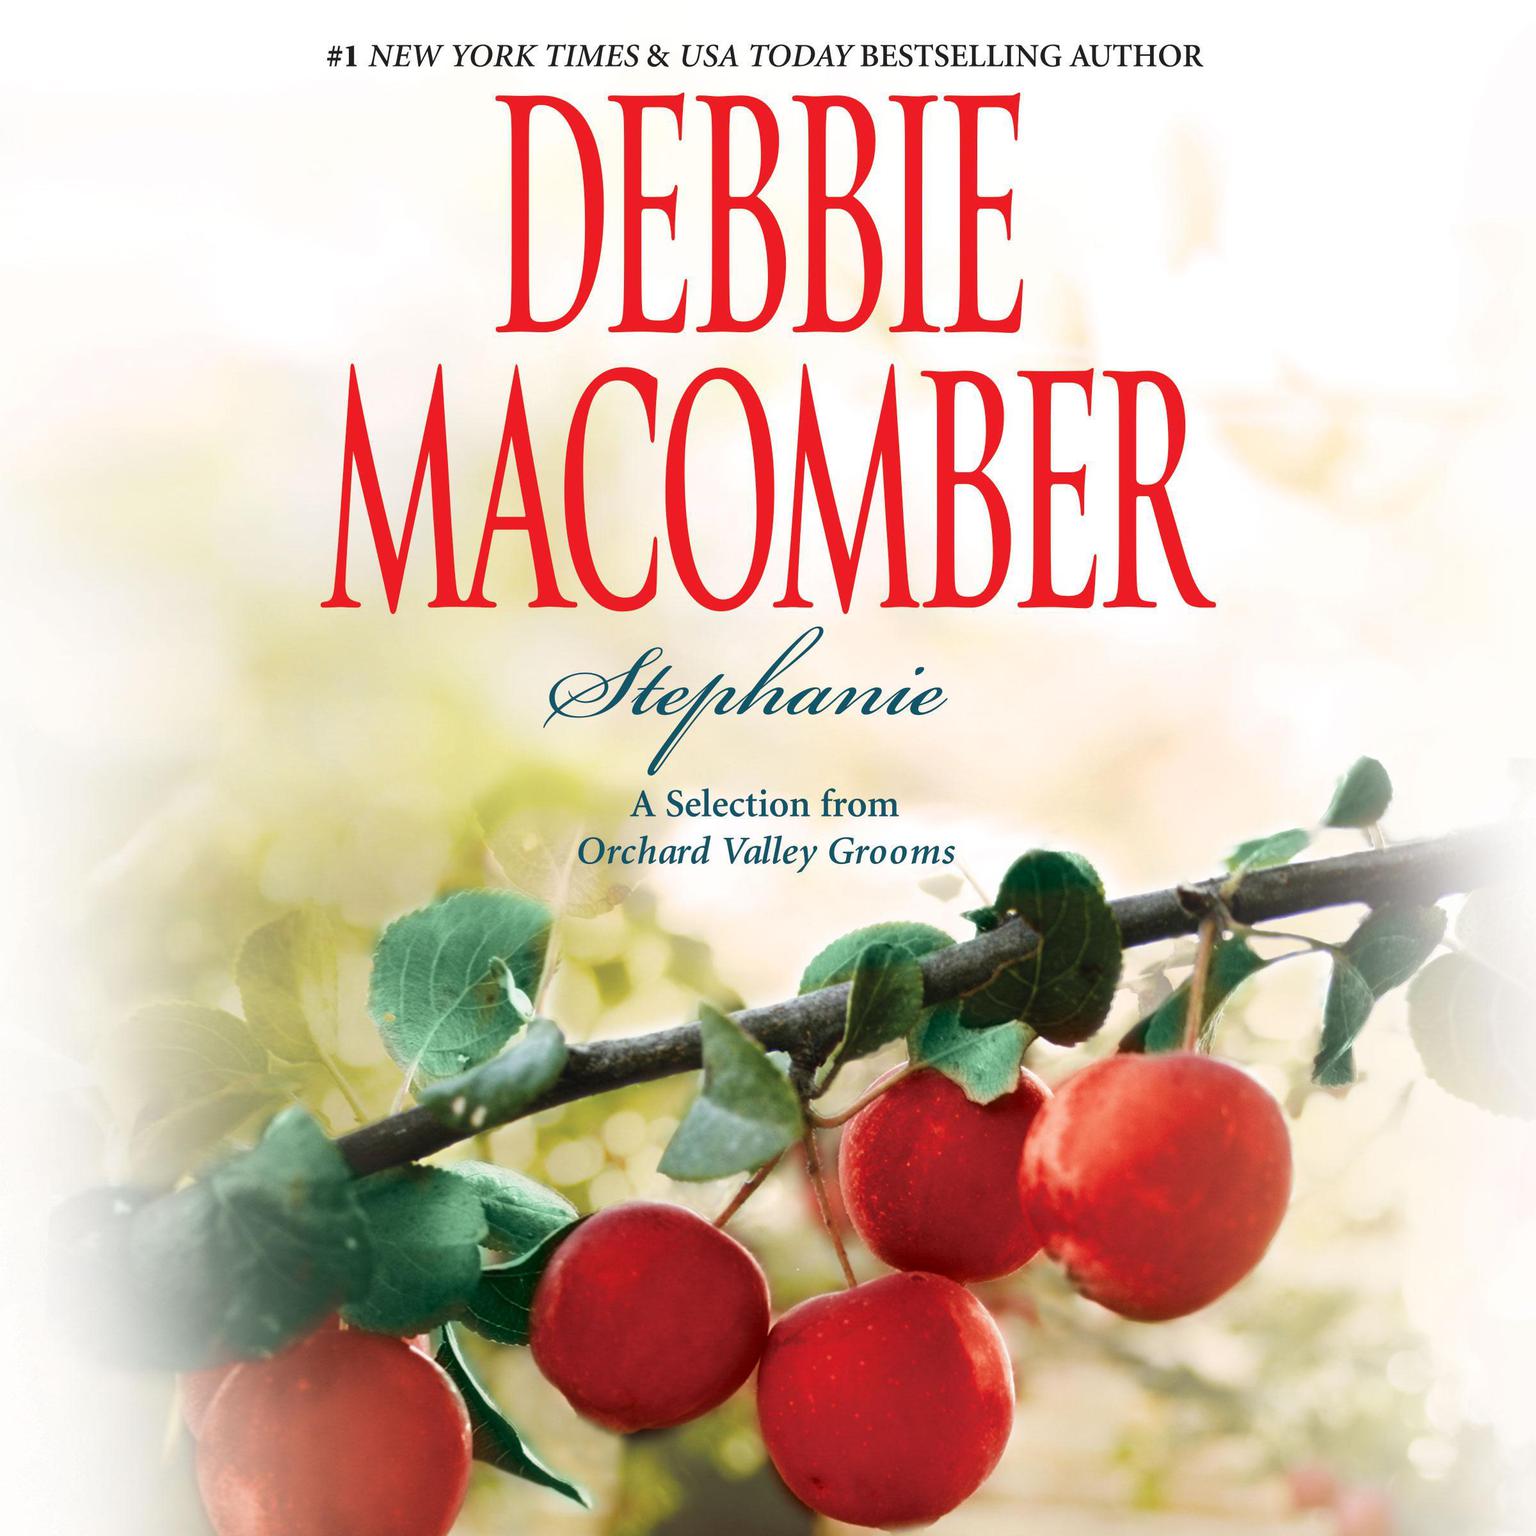 Stephanie: A Selection from Orchard Valley Grooms Audiobook, by Debbie Macomber